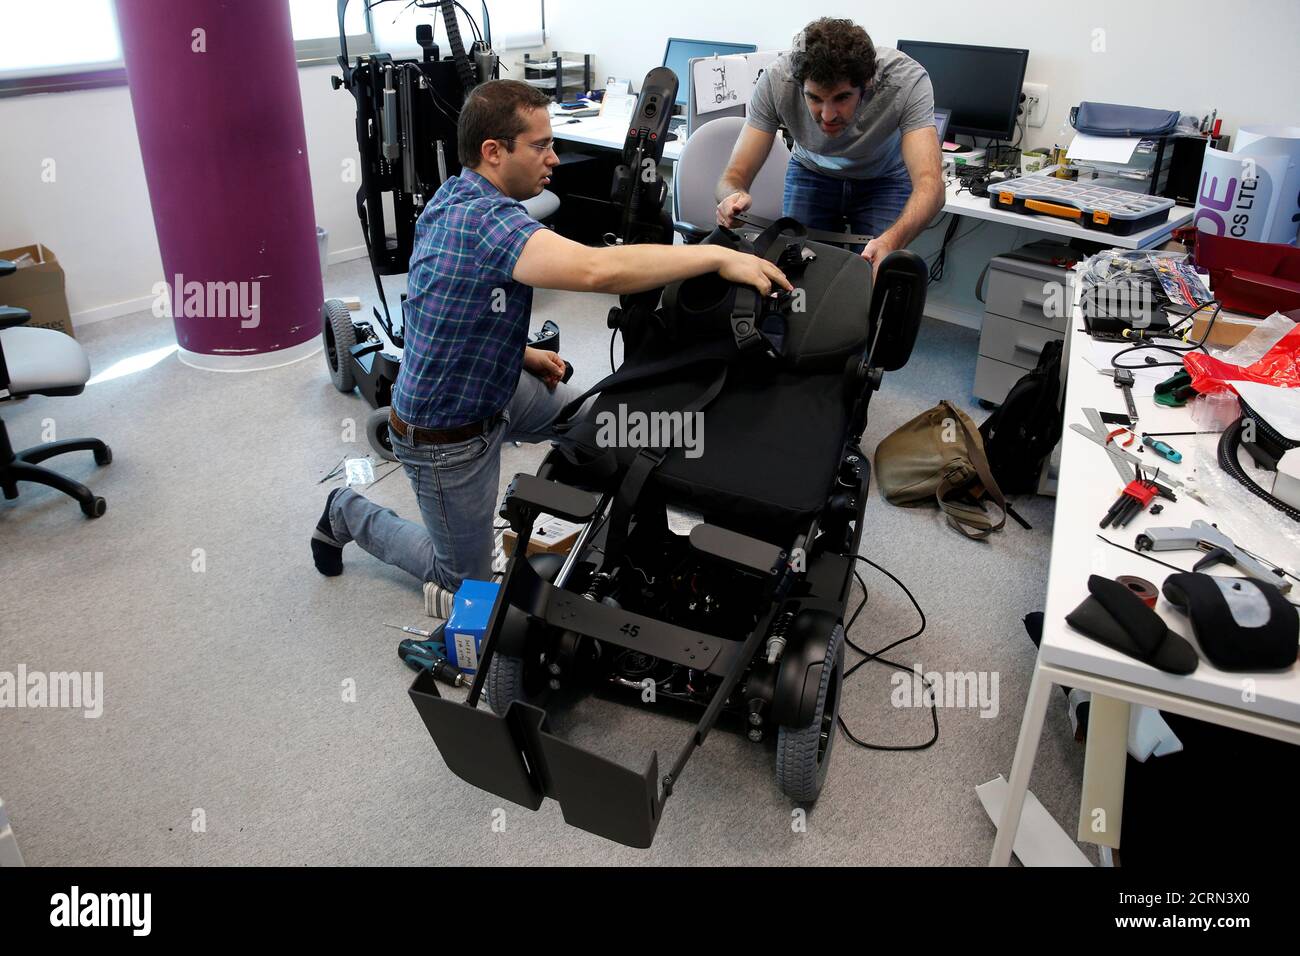 Employees work on a wheelchair developed by Israeli company UPnRIDE Robotics,  that enables paralysed people with limited function in their arms to stand  upright, during a demonstration at their offices in Yoqneam,